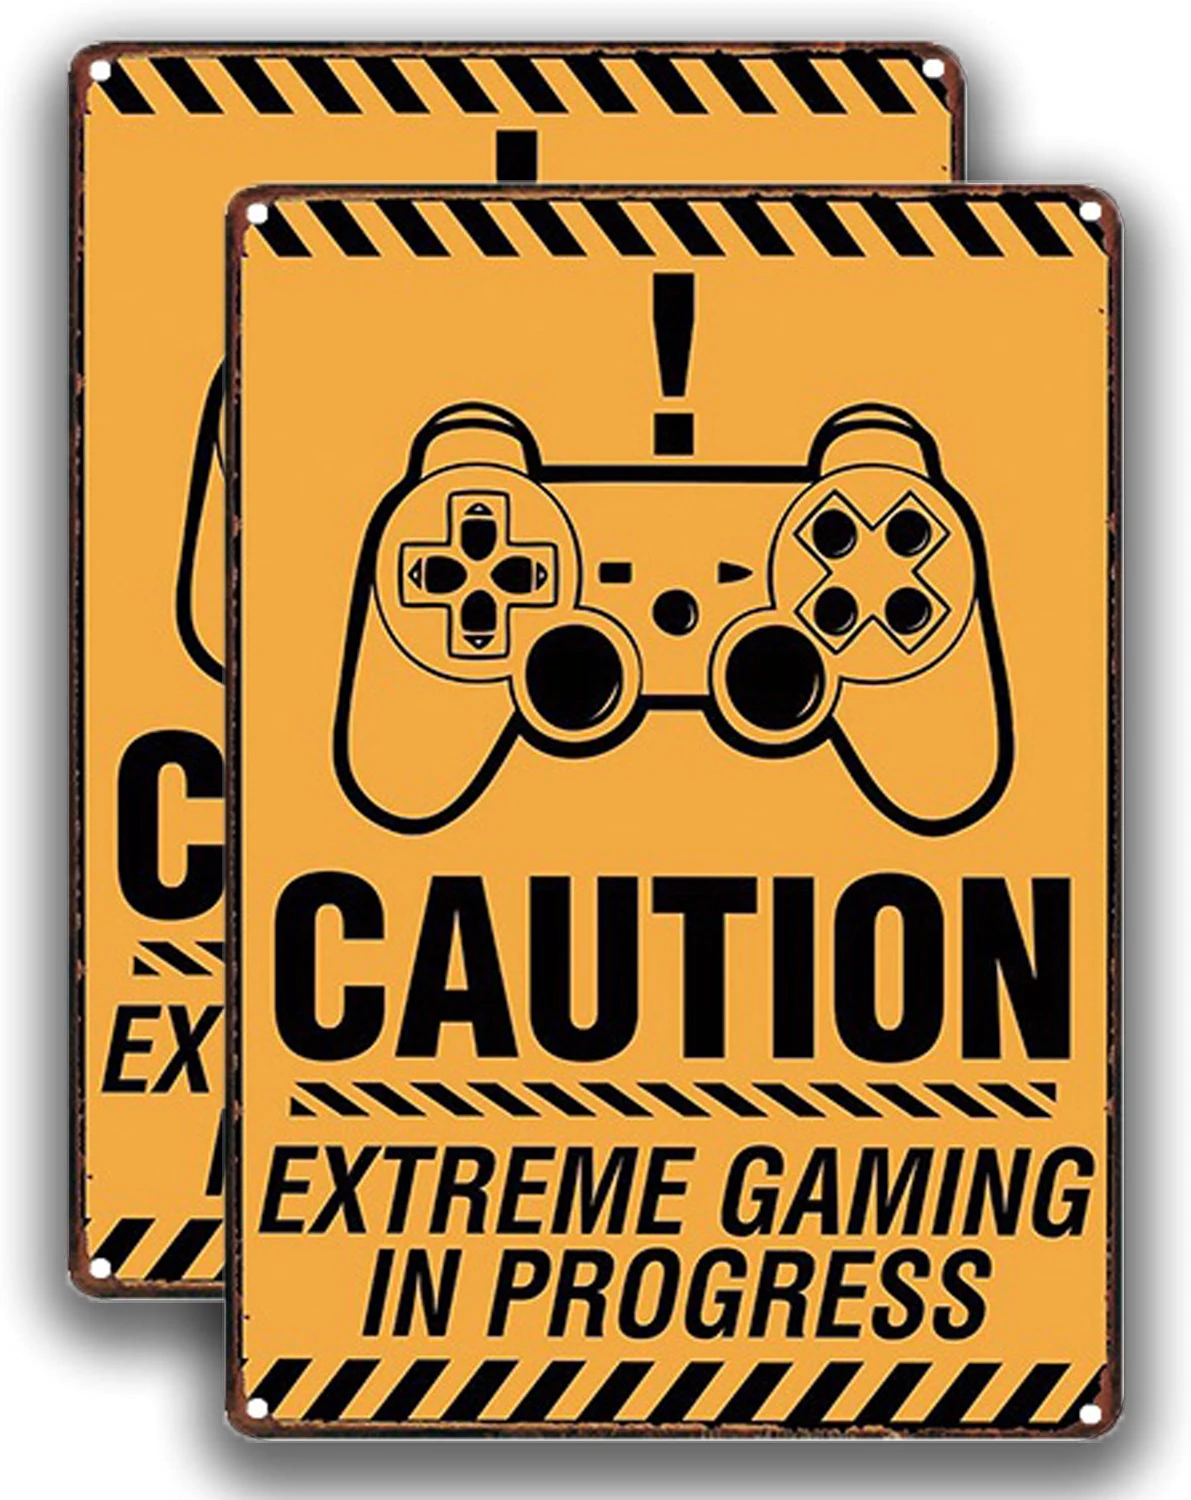 EXTREME GAMING INSIDEMetal Wall Sign Plaque Bedroom Gamer WTFCAUTION 